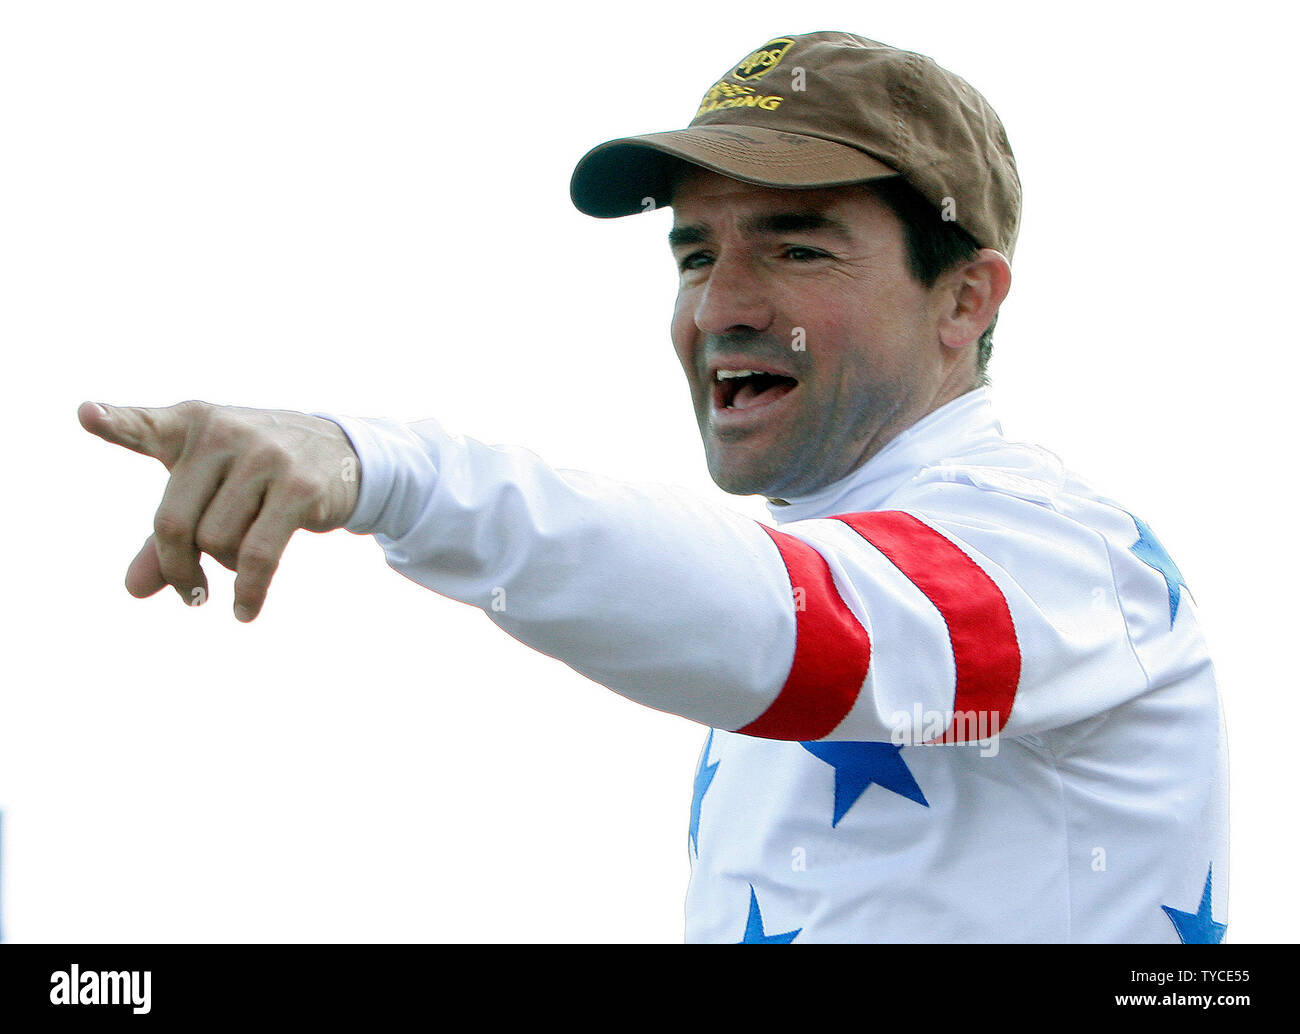 Kent Desormeaux, jockey for Big Brown, points to the crowd after winning the 134th running of the Kentucky Derby at Churchill Downs on May 3, 2008 in Louisville, Kentucky. (UPI Photo/Frank Polich) Stock Photo